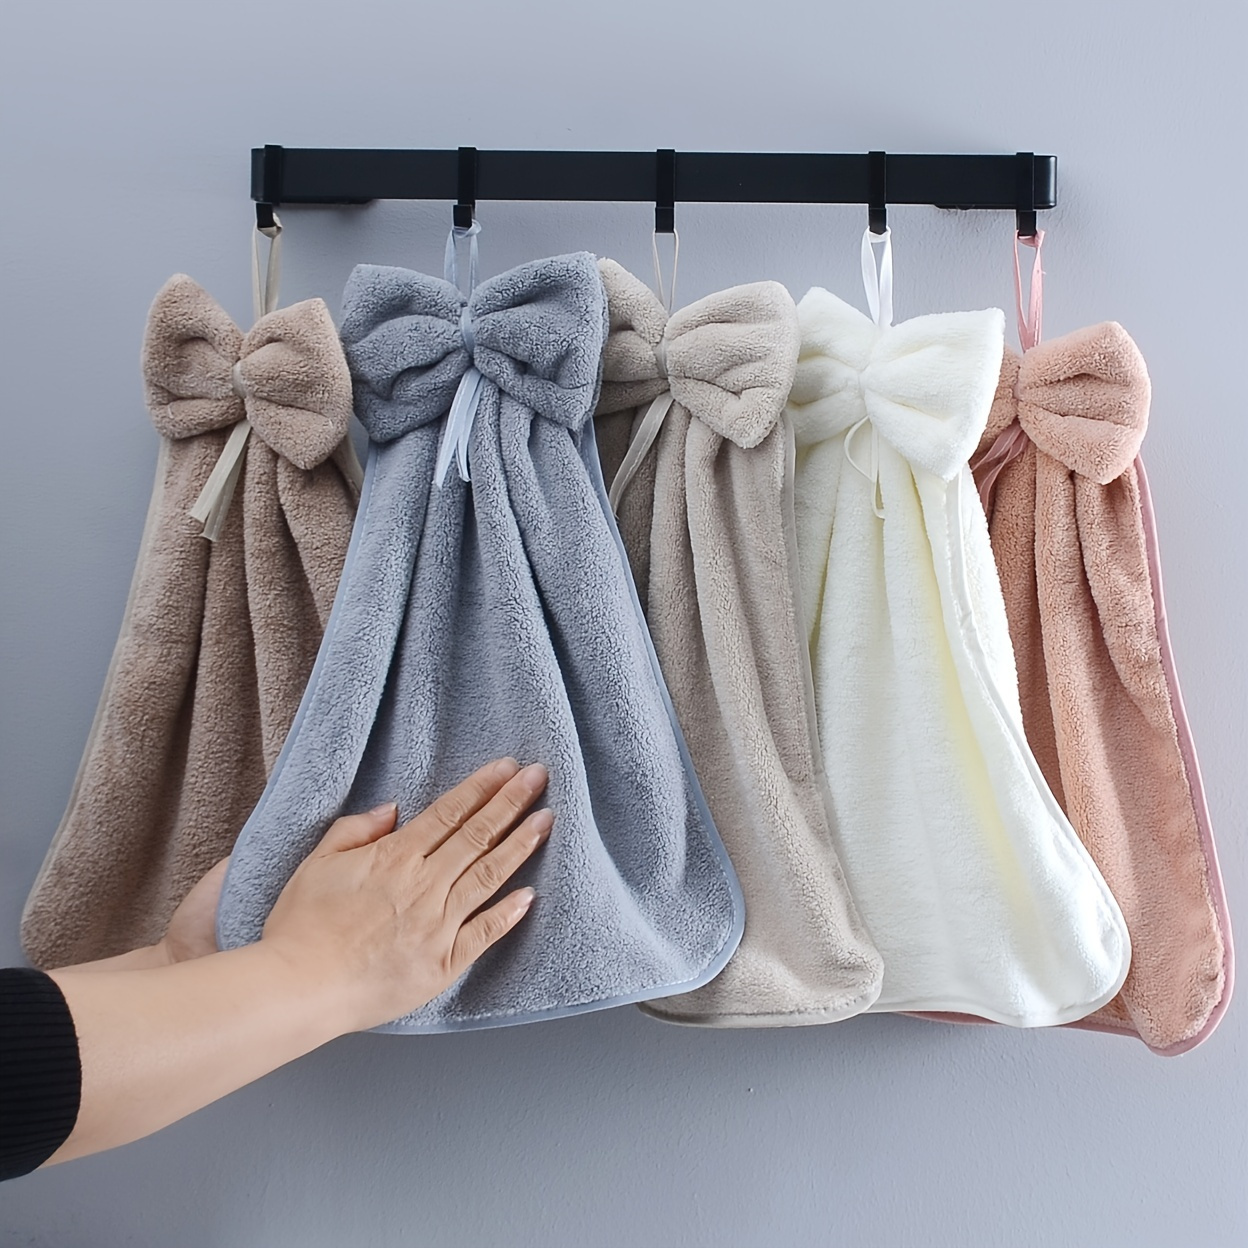 https://img.kwcdn.com/product/coral-fleece-creative-bow-style-soft-absorbent-hand-towel/d69d2f15w98k18-bfc4a4fa/1dab9aa434/98f77385-bc19-4322-9b41-d9bd12ca3e9e_1248x1248.jpeg.a.jpg